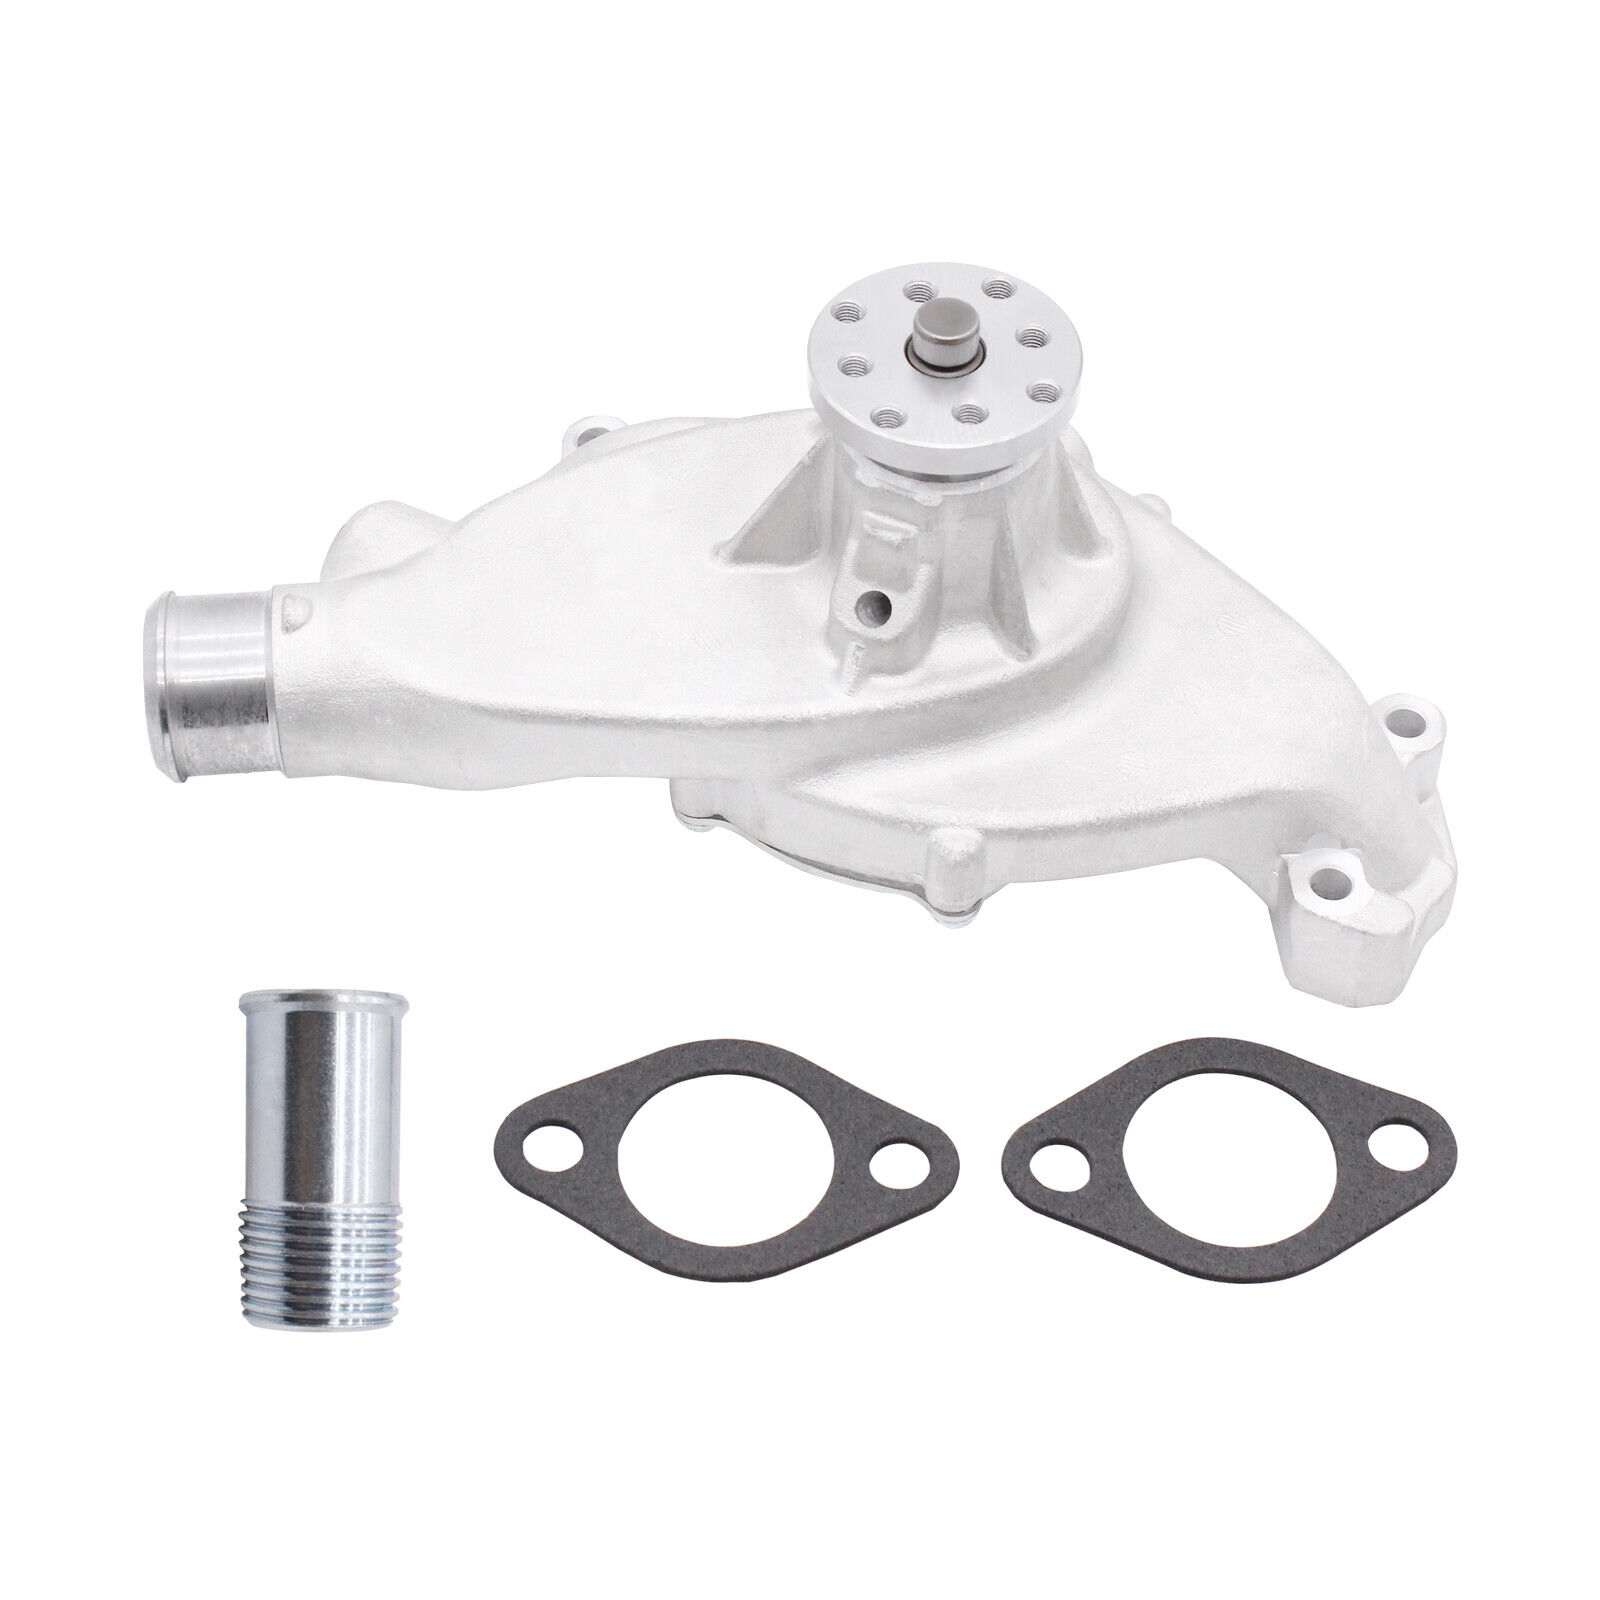 Satin Aluminum Short Water Pump Fit For Chevy BBC 396 402 427 454 502